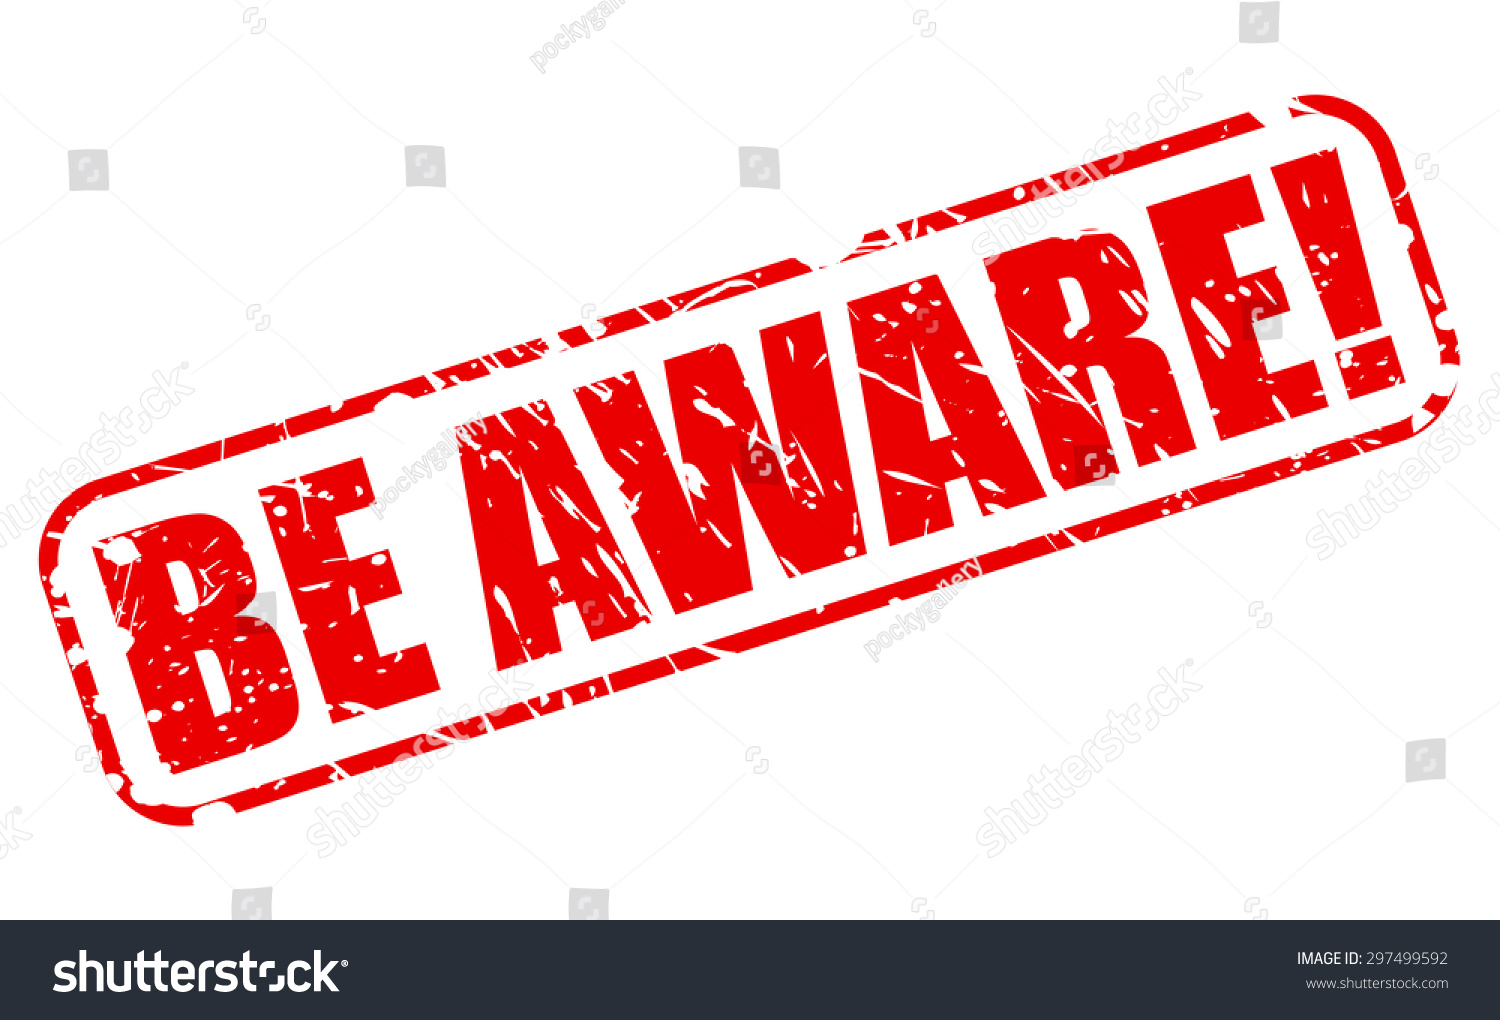 Be Aware Red Stamp Text On White Stock Vector Illustration 297499592